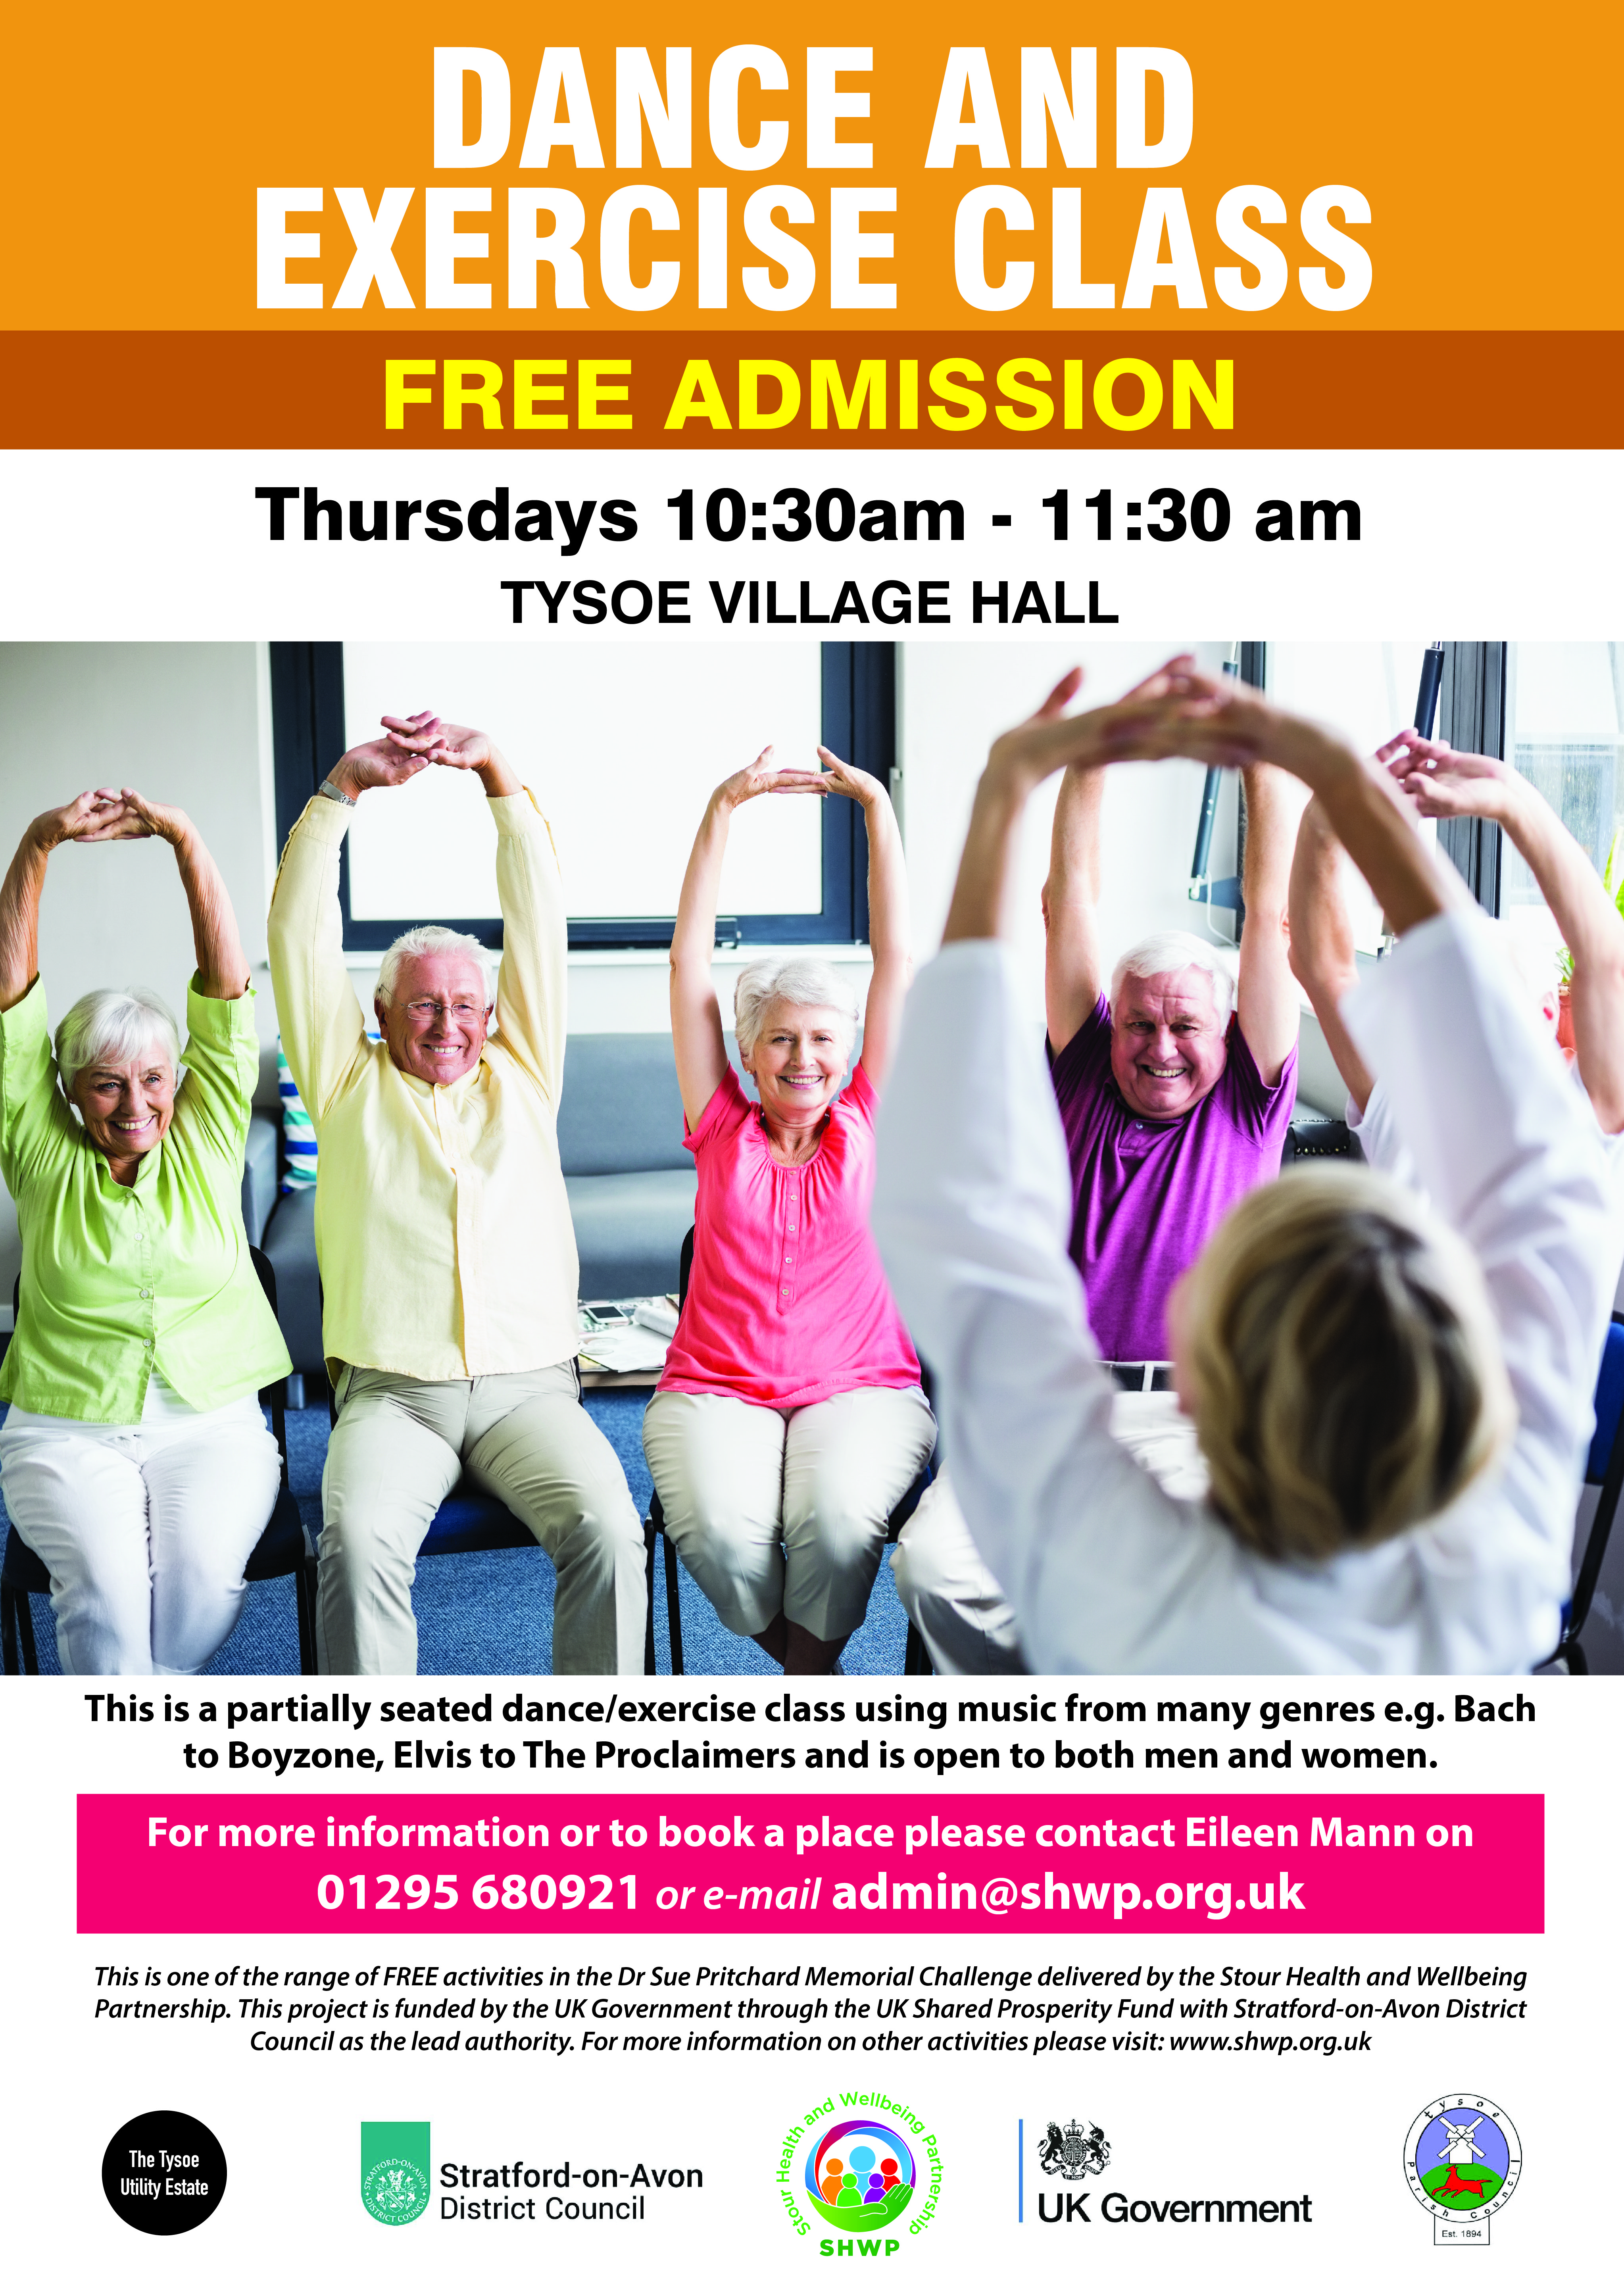 FREE Dance and Exercise Class at Tysoe Village Hall - Thursdays 10:30 - 11:30